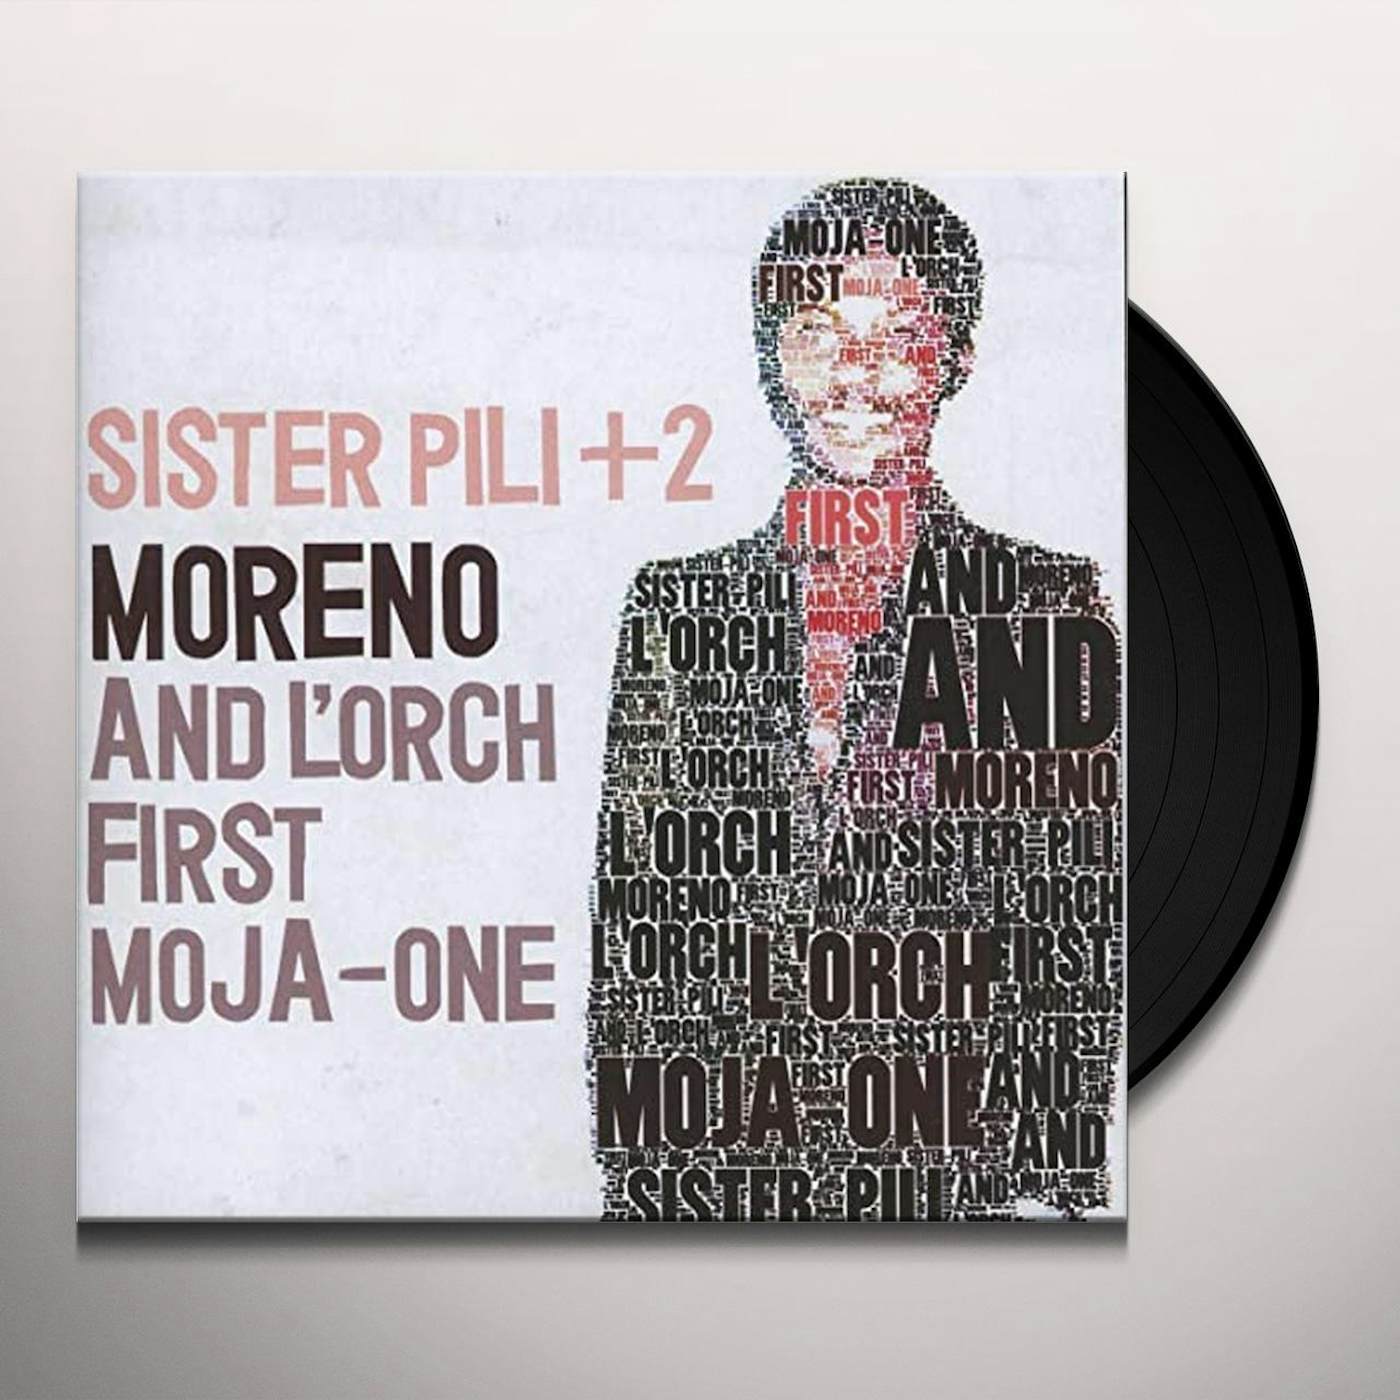 Moreno / L'Orch First Moja-One DANGER GIRL Vinyl Record